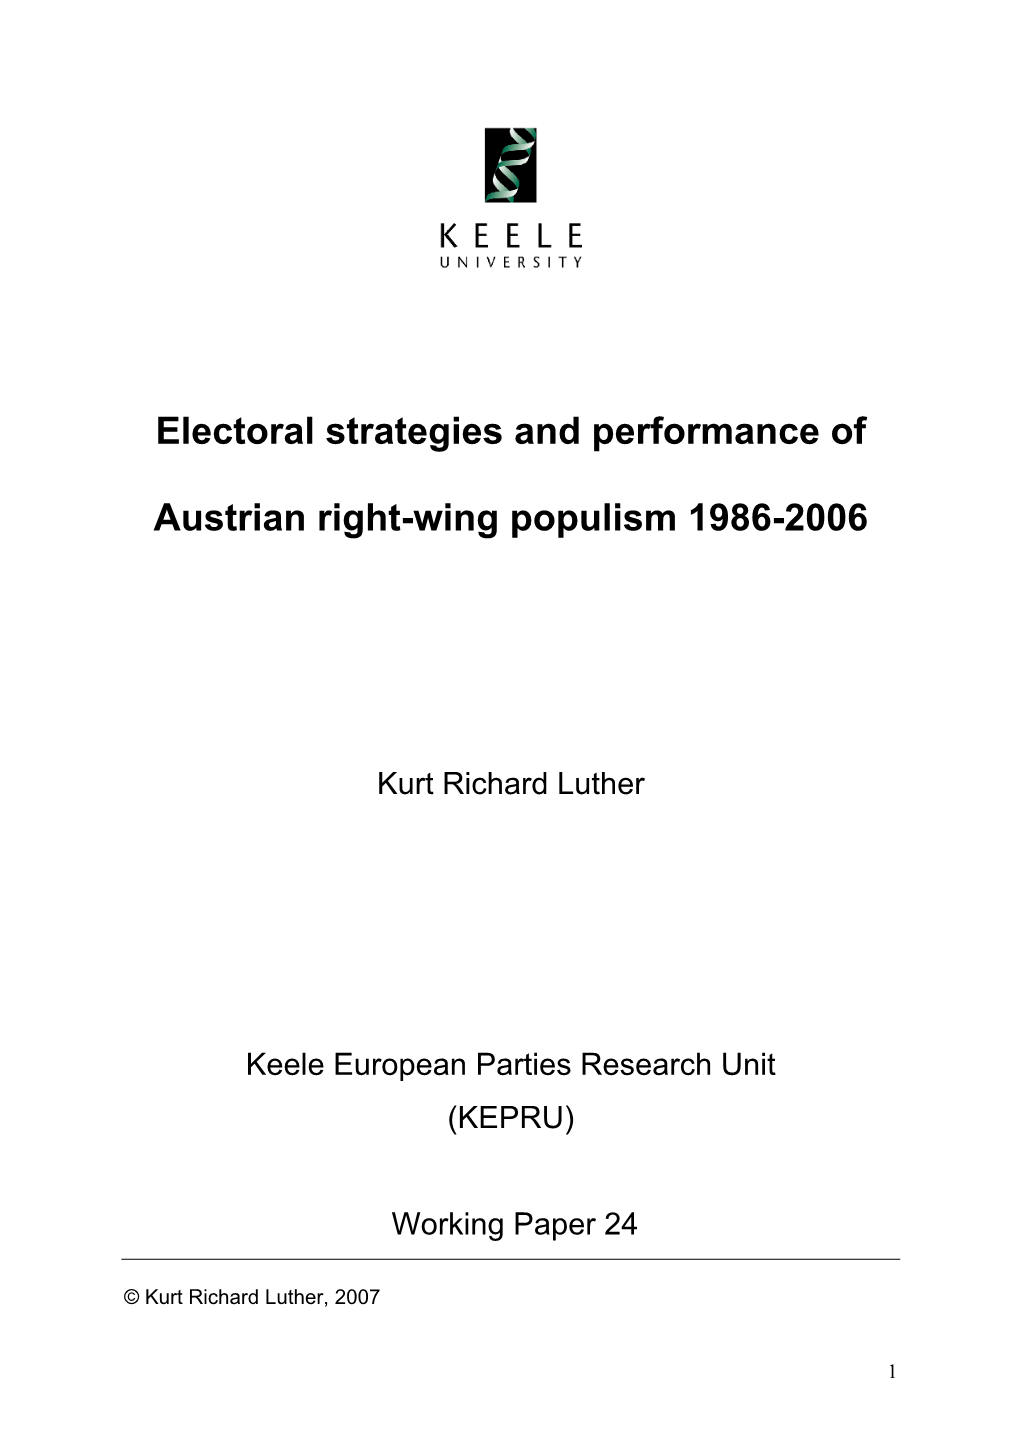 Strategies and Electoral Outcomes of Austrian Right Wing Populism 1986